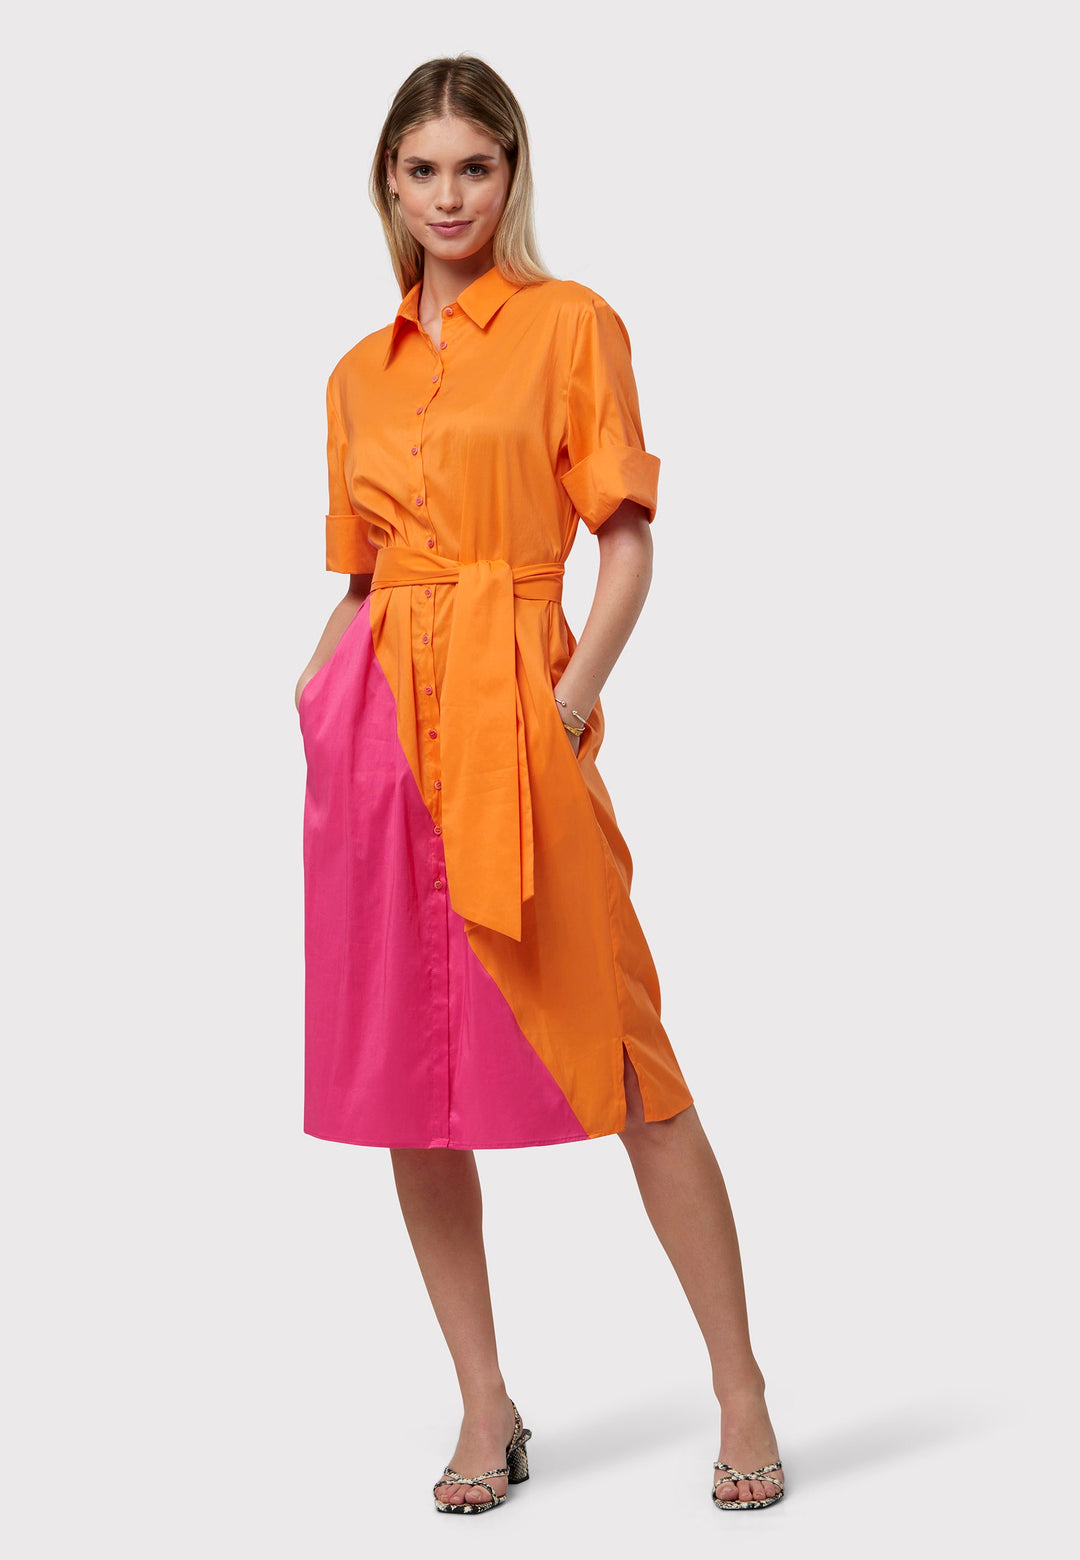 Introducing Bella, A bicoloured Shirt dress with a bold asymmetric panel, on both the front and back in vivid shades of orange and pink. Your go-to shirt dress. Crafted with a sleek edge, this dress boasts a detachable belt that cinches the waist. The relaxed silhouette drapes over the hips with practical side seam pockets.